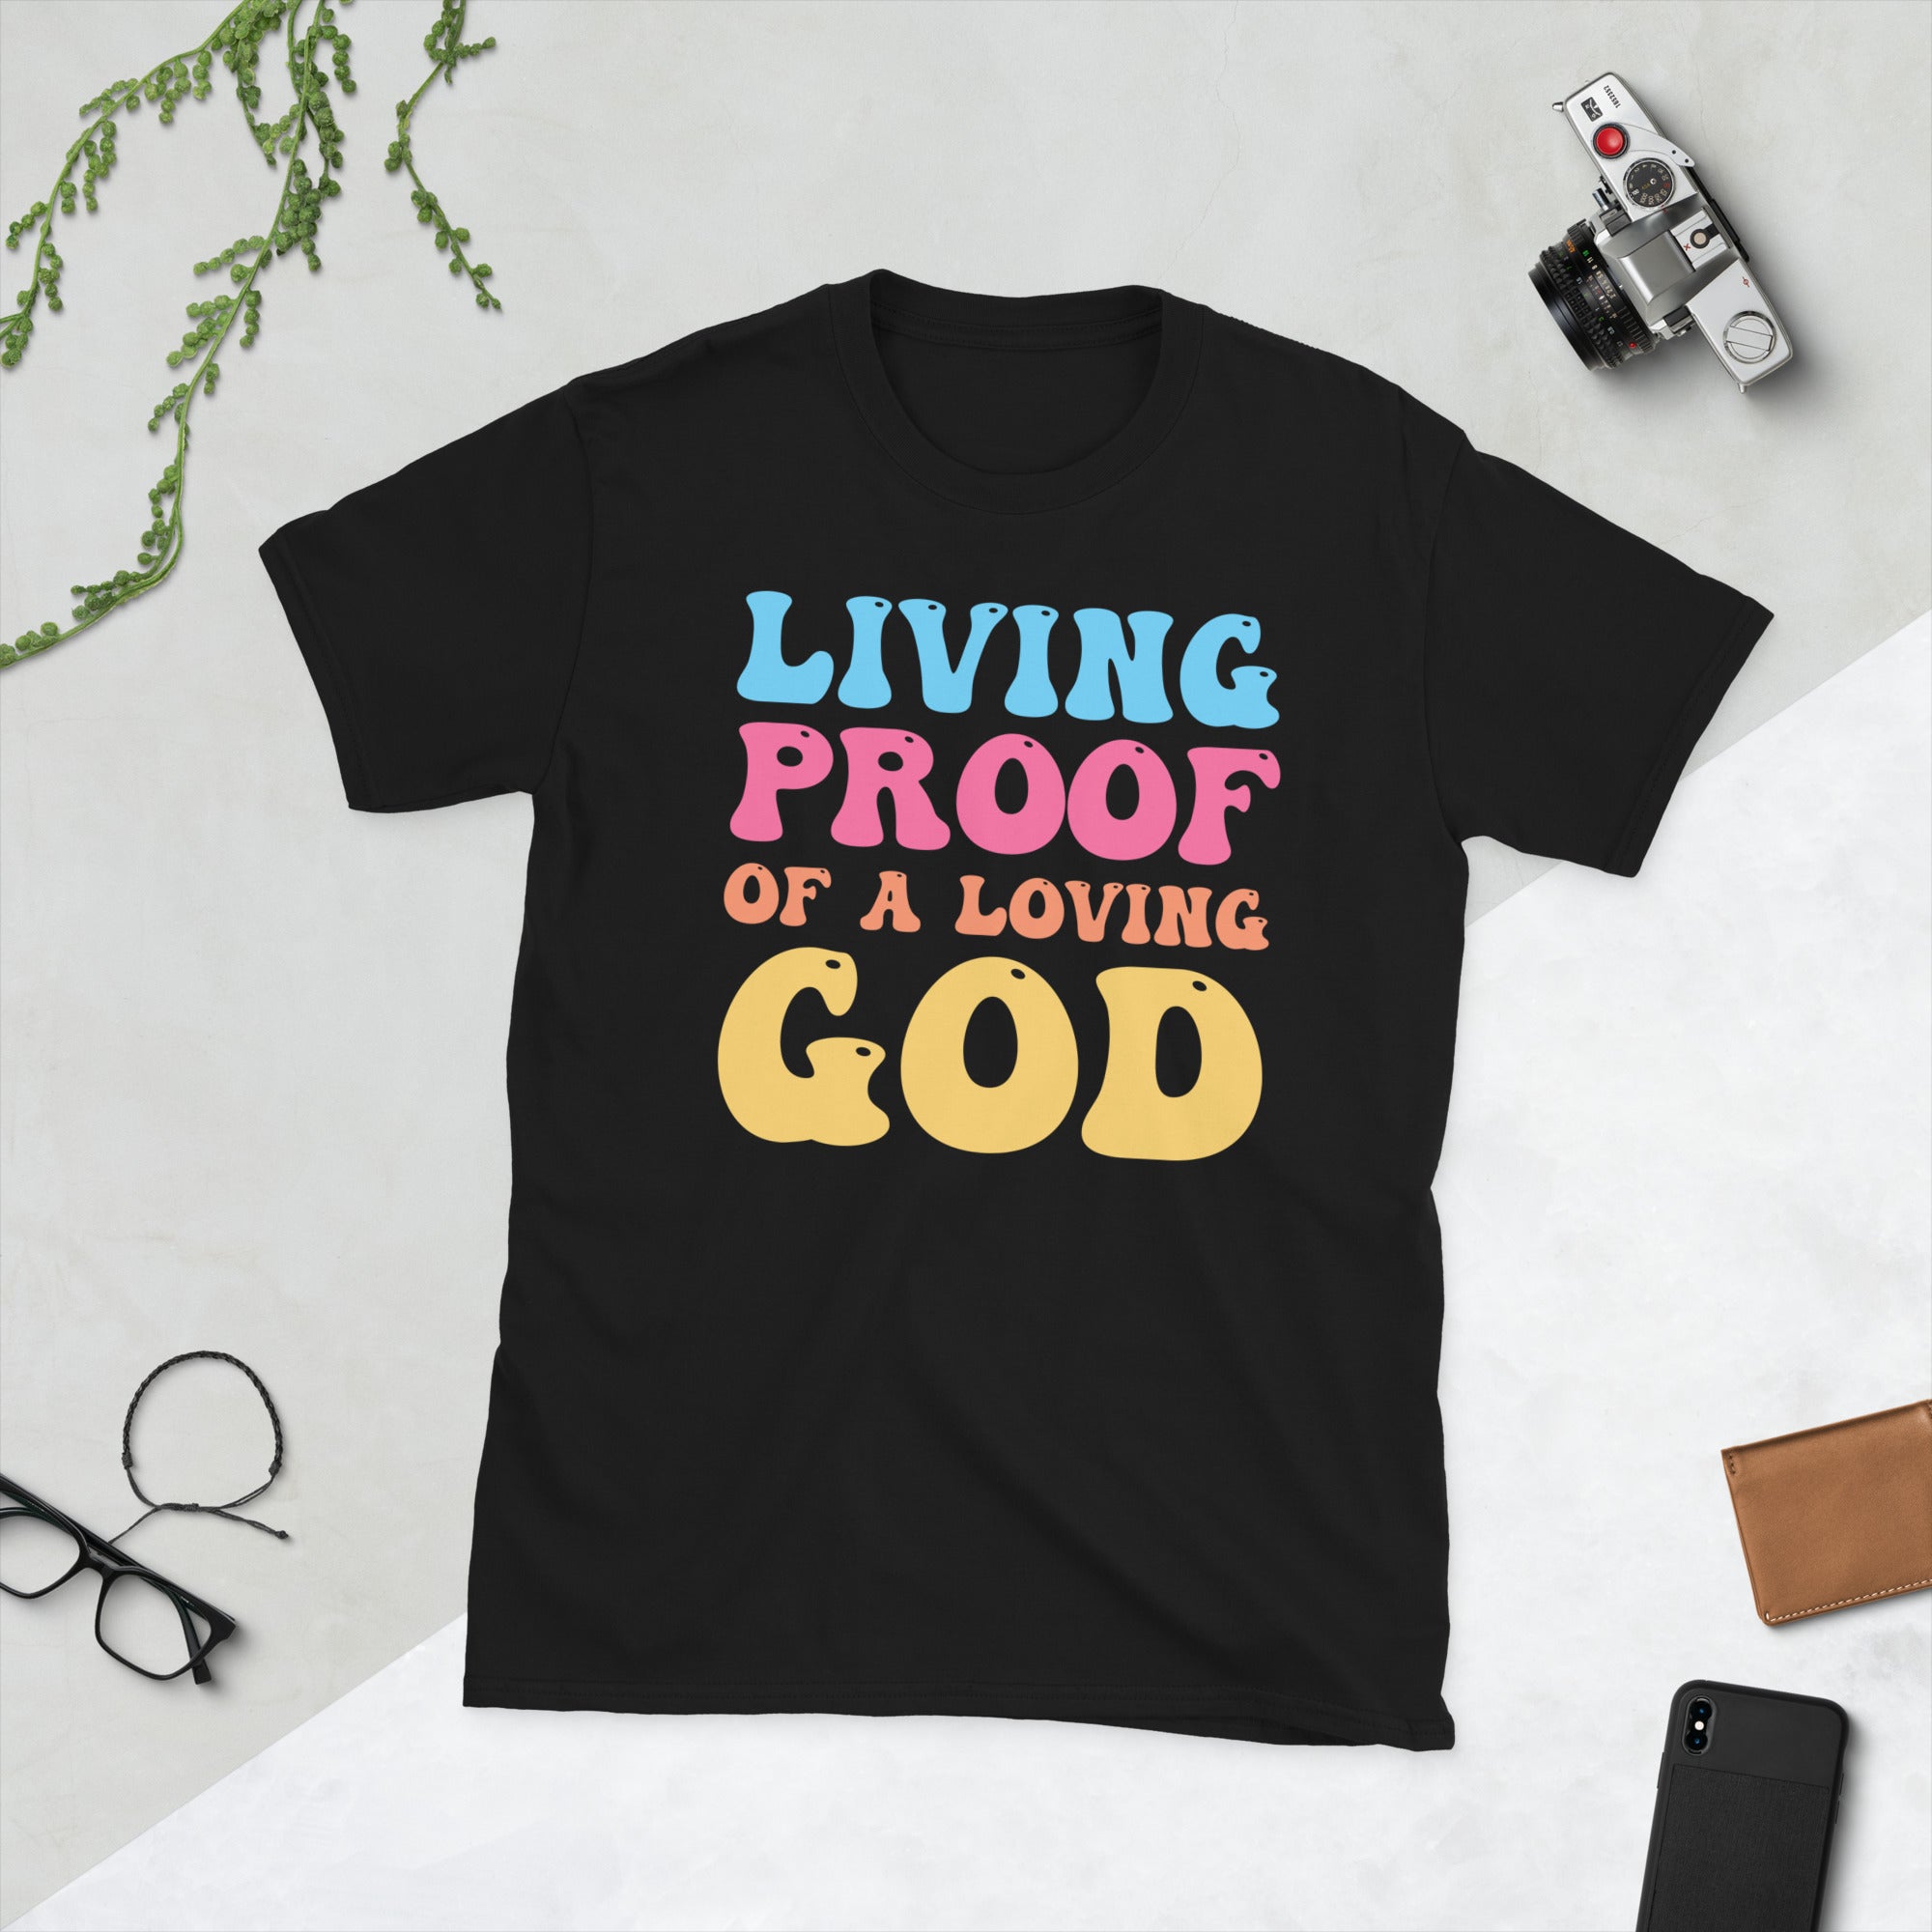 Living Proof Of A Loving God, Aesthetic Christian Shirt, Women&#39;s Religious TShirt, Bible Verse Shirts, Faith Tshirt, Christian Gifts For Him - Madeinsea©